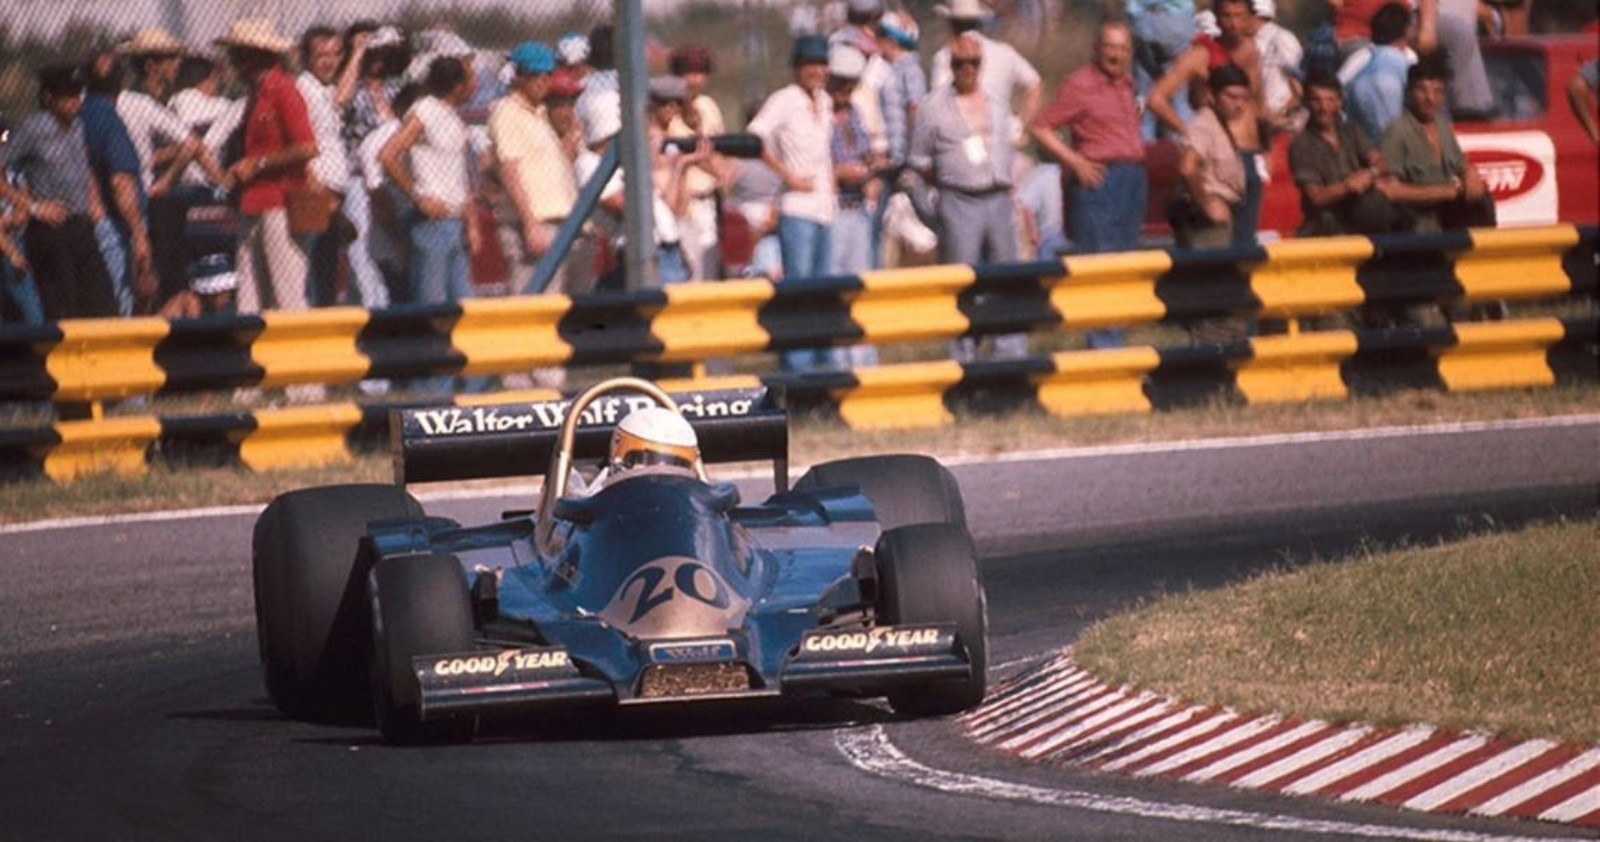 Jody Scheckter races to the win at the 1977 Argentinian Grand Prix in his Wolf WR1.